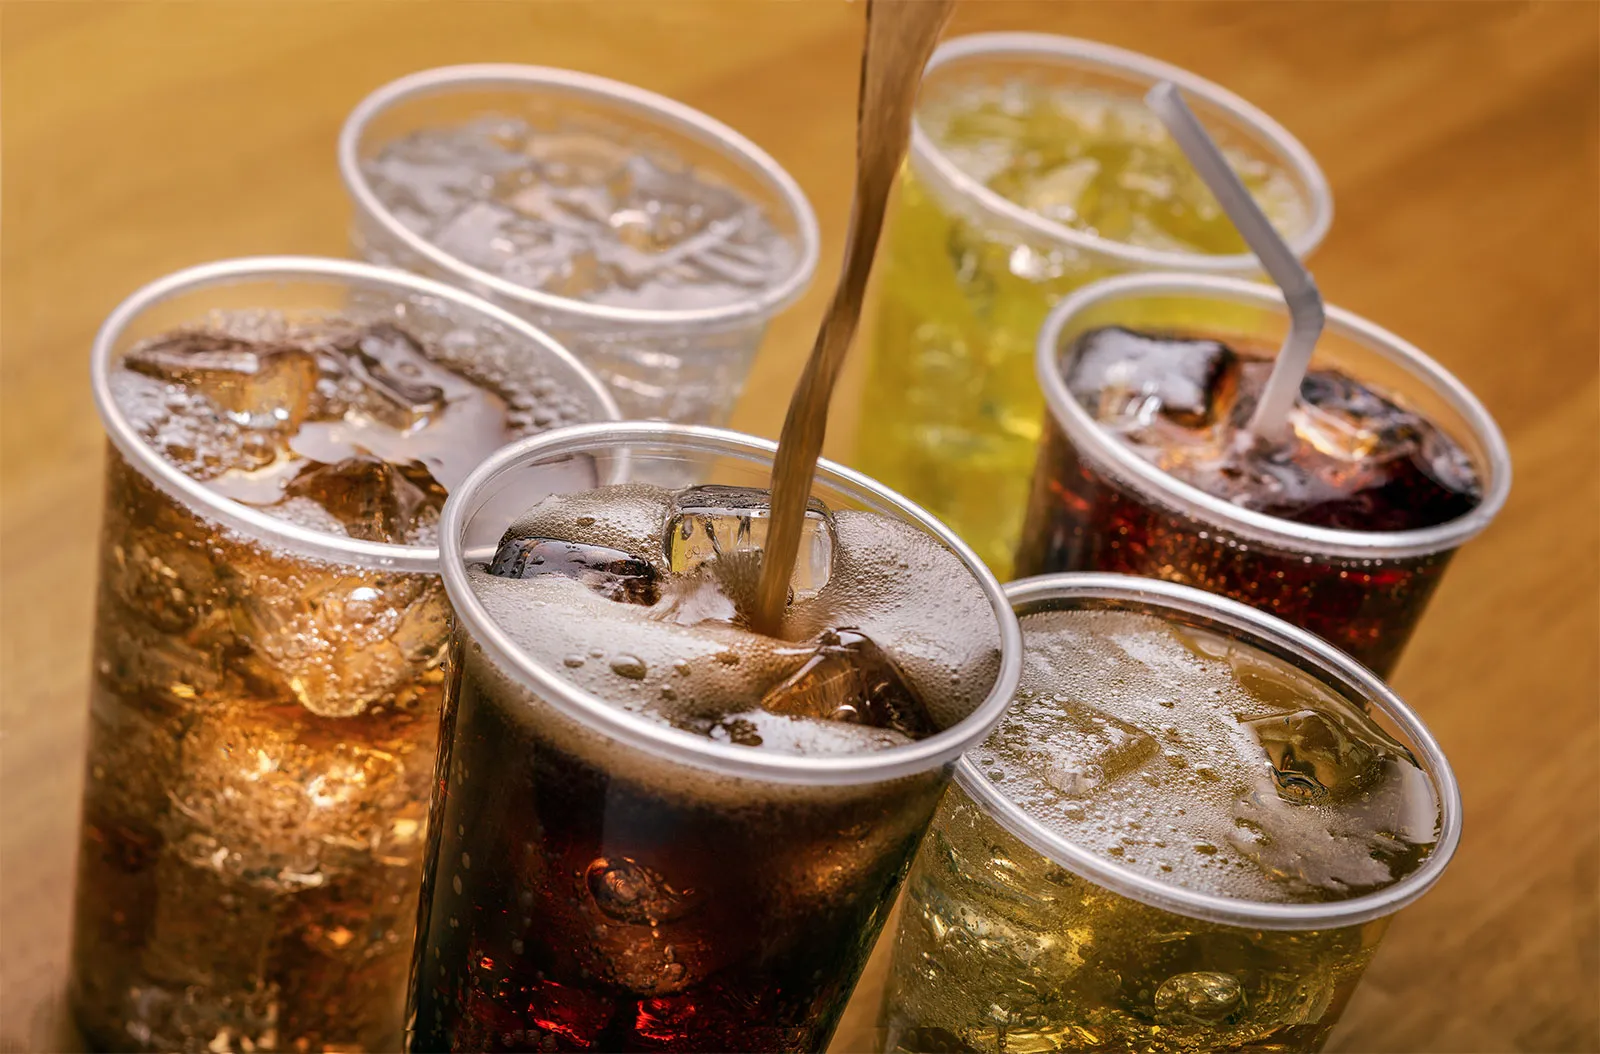 Drinks with added sugars may increase the risk of male hair loss, according to a new study